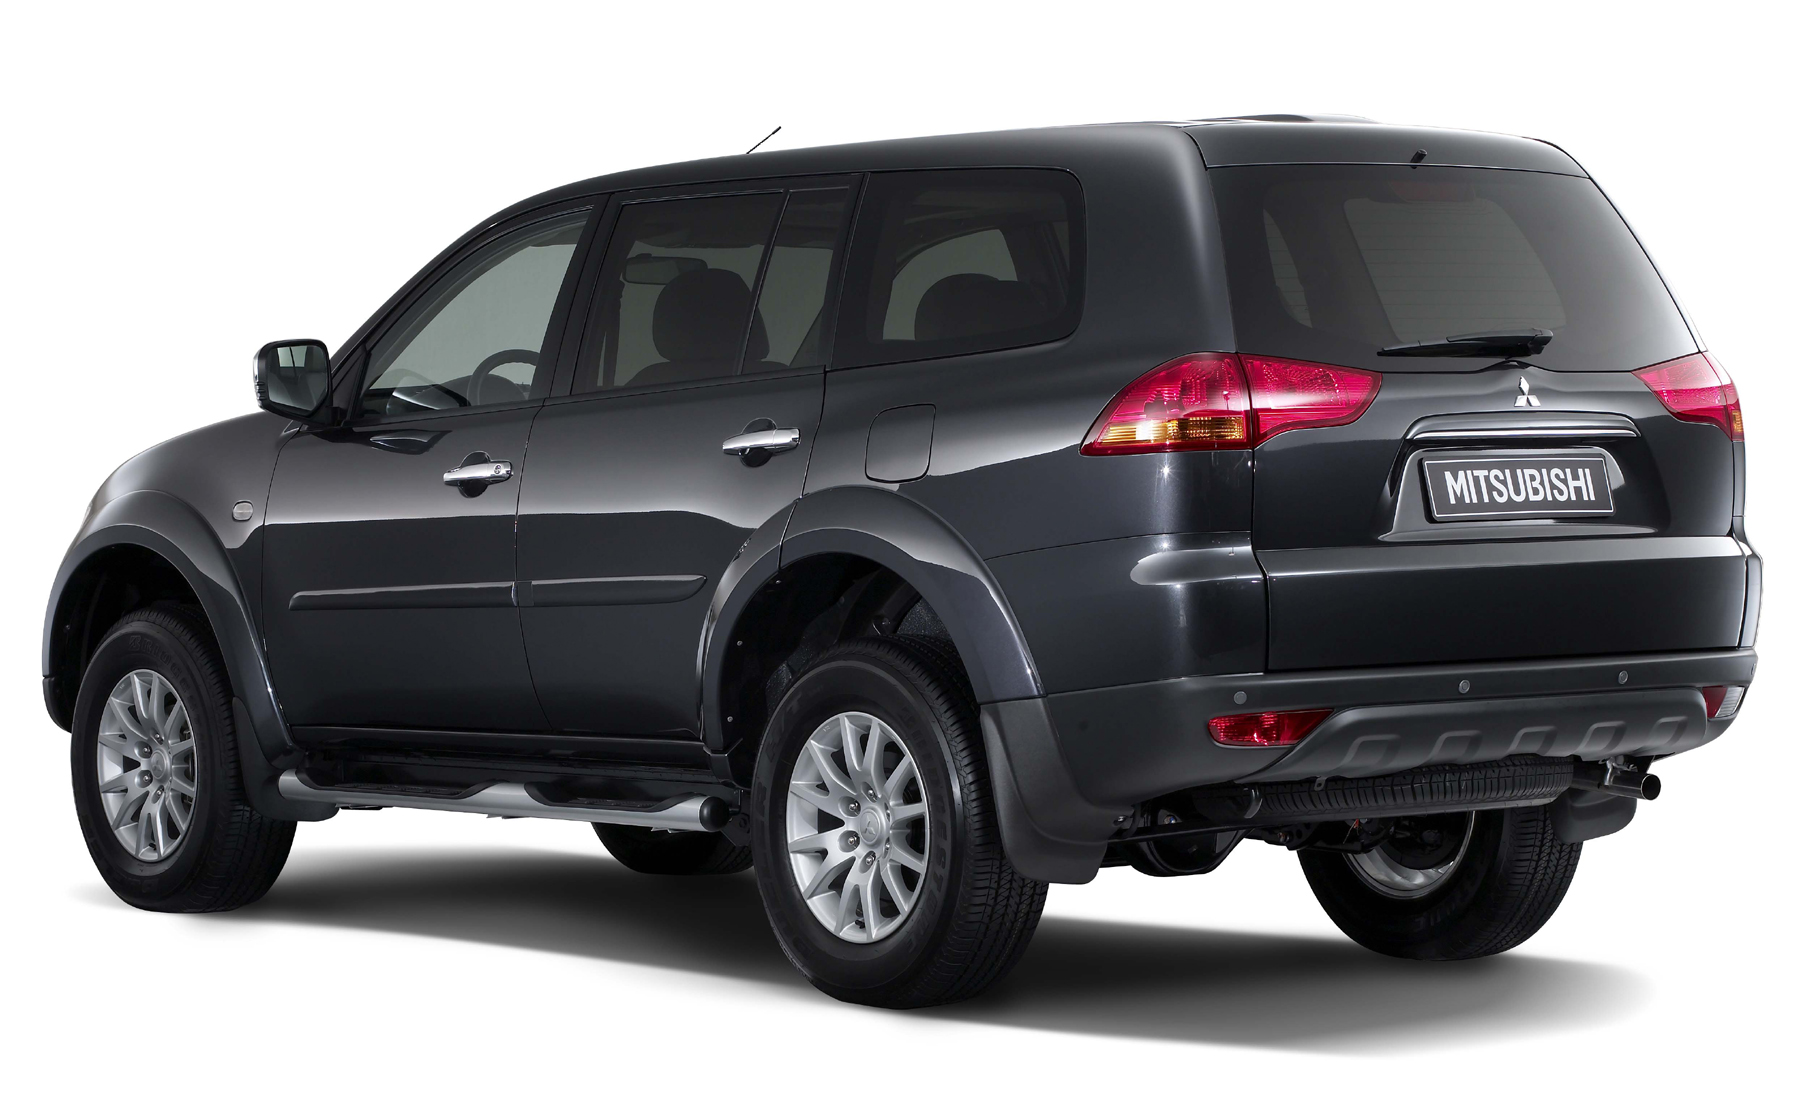 Mitsubishi Pajero Sport SUV to be unveiled at 2008 Moscow Motor Show